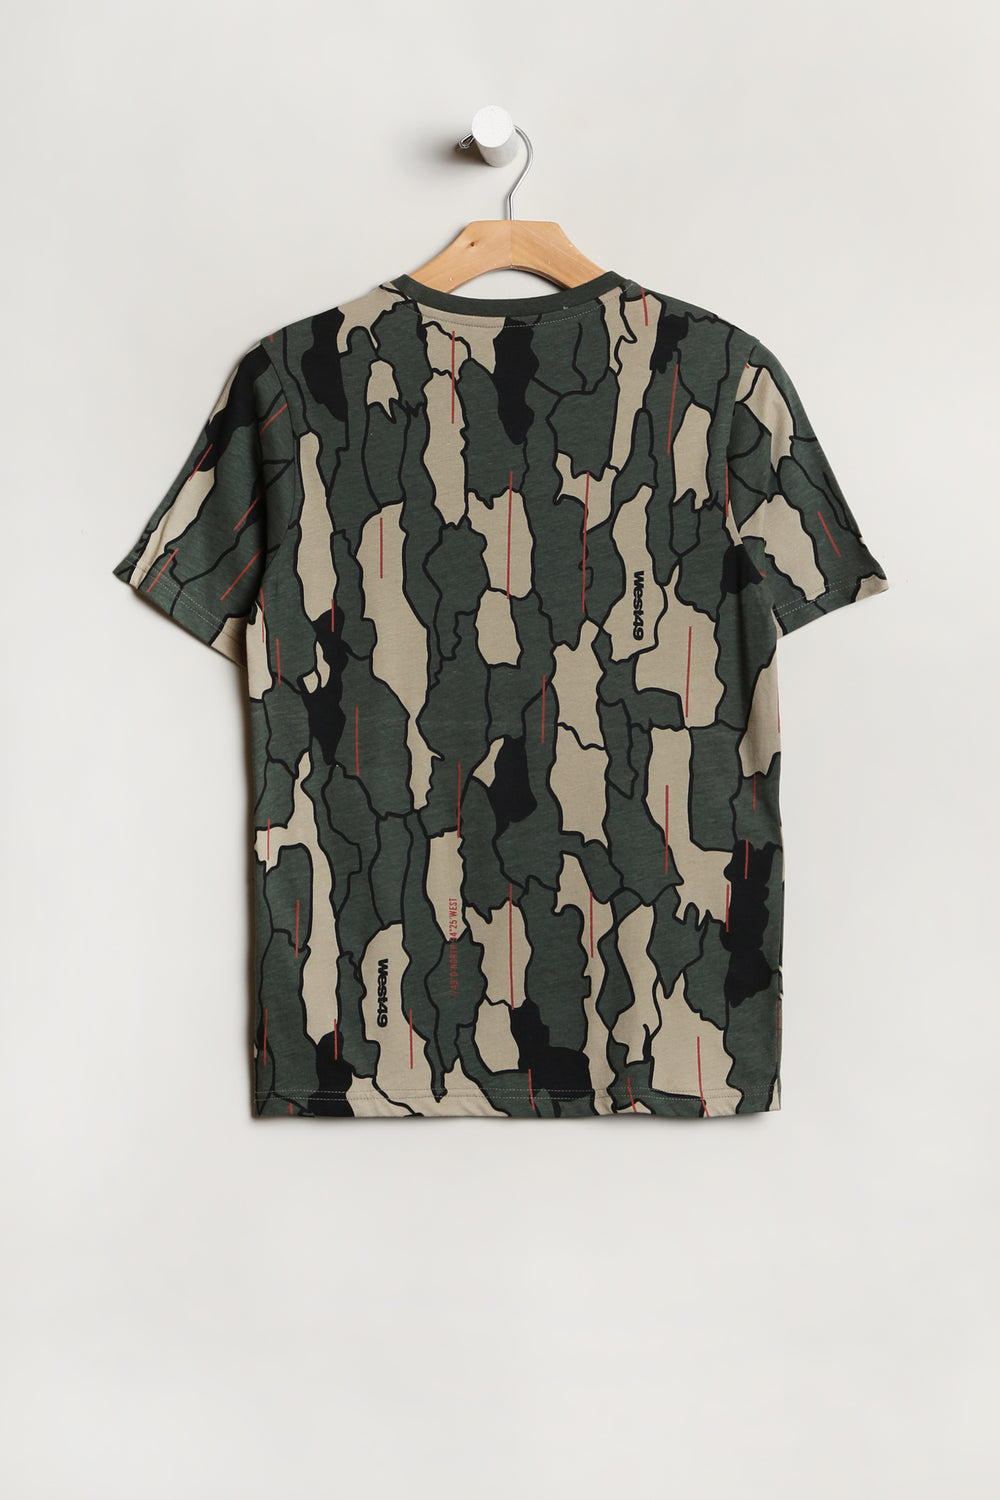 West49 Youth Allover Camo Print T-Shirt West49 Youth Allover Camo Print T-Shirt